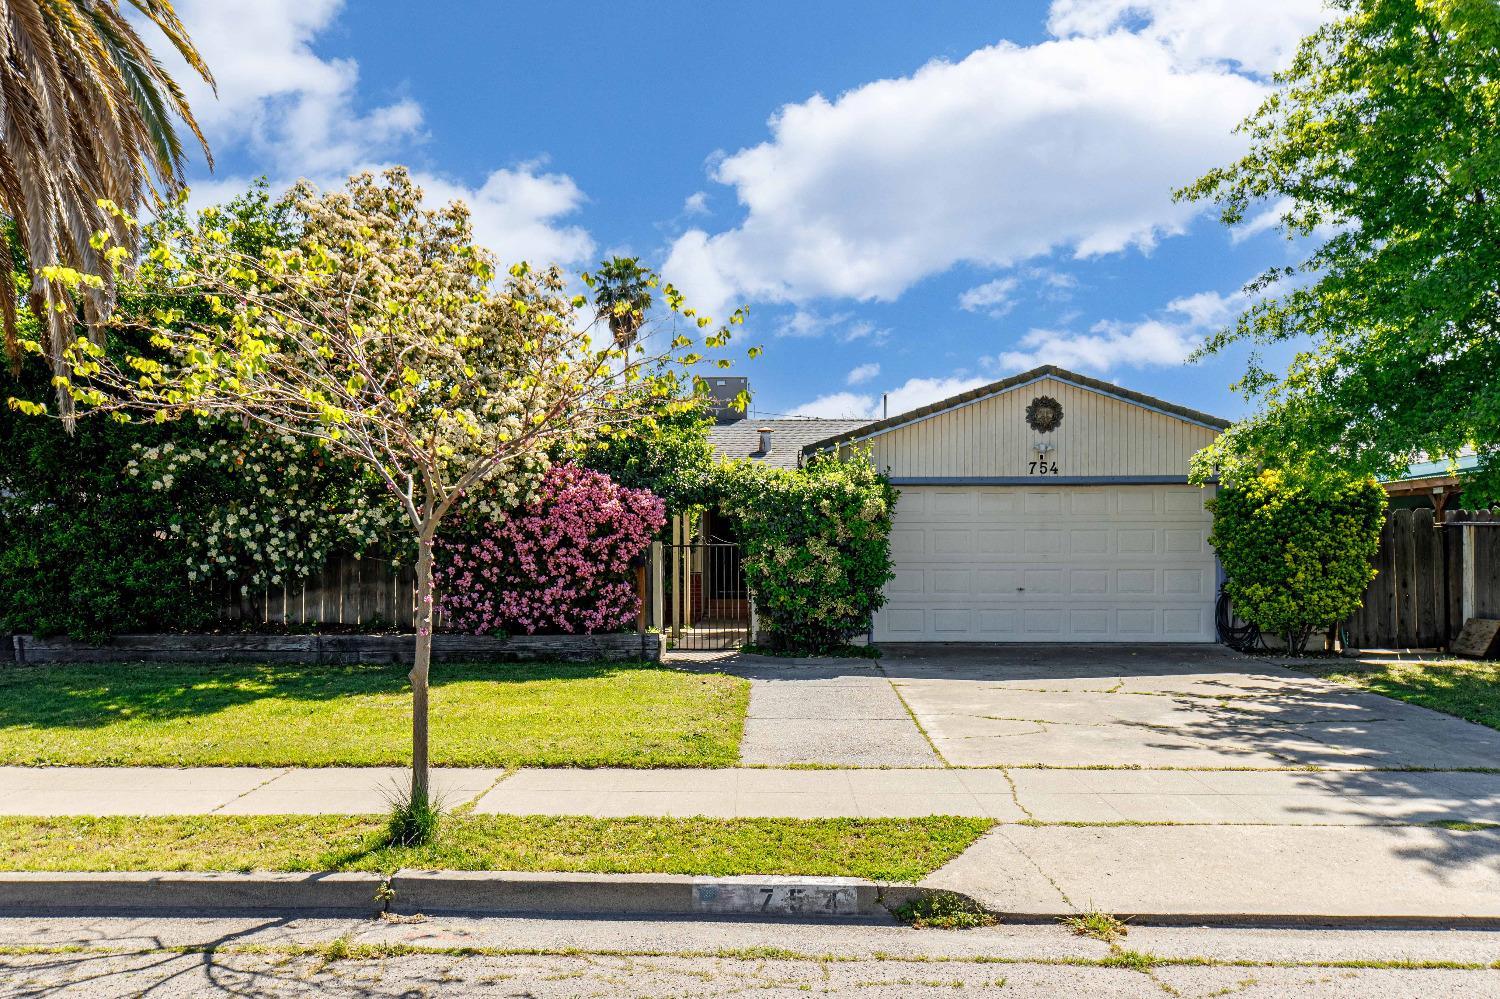 Photo of 754 Kadota Ave in Atwater, CA